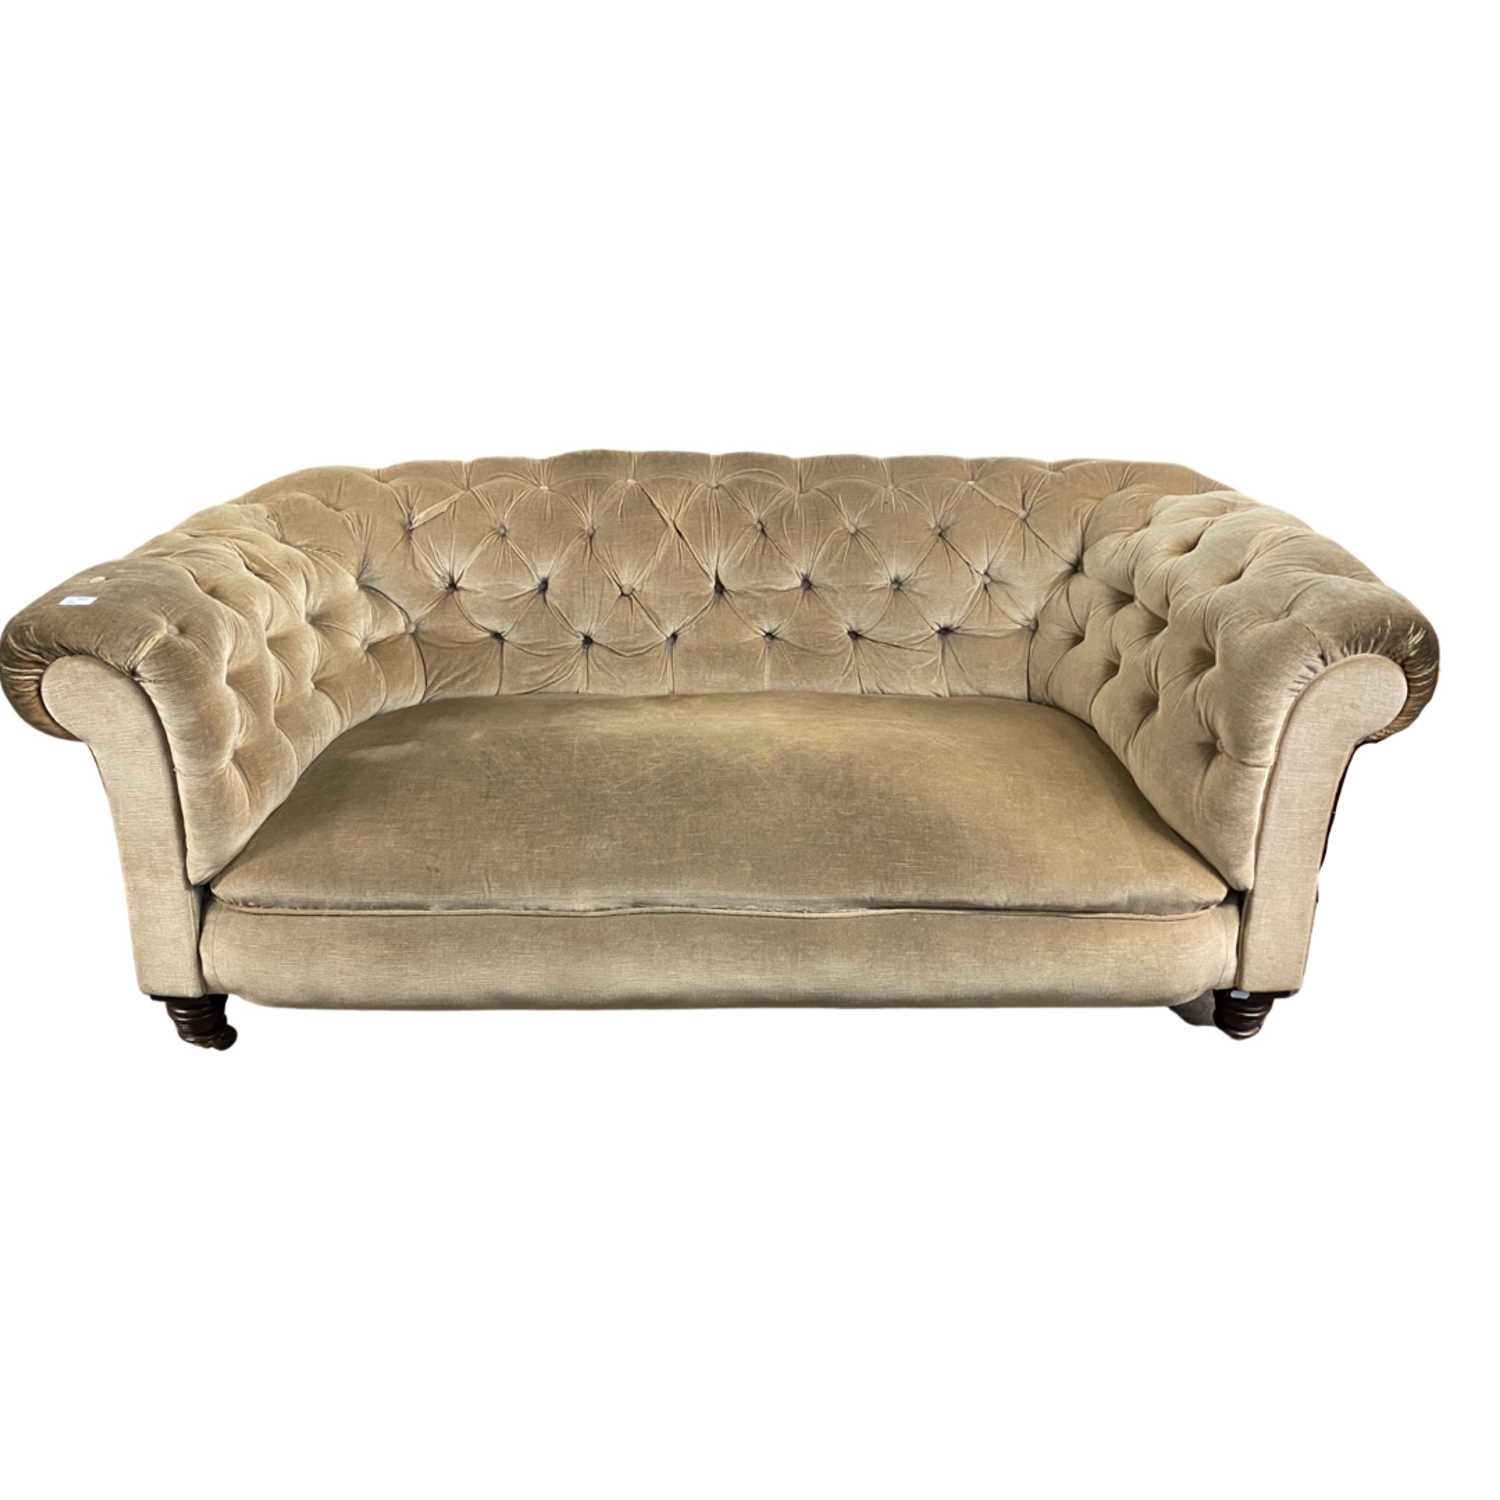 Late 19th/early 20th Century mushroom upholstered Chesterfield sofa, 180cm wide, worn condition - Image 2 of 2